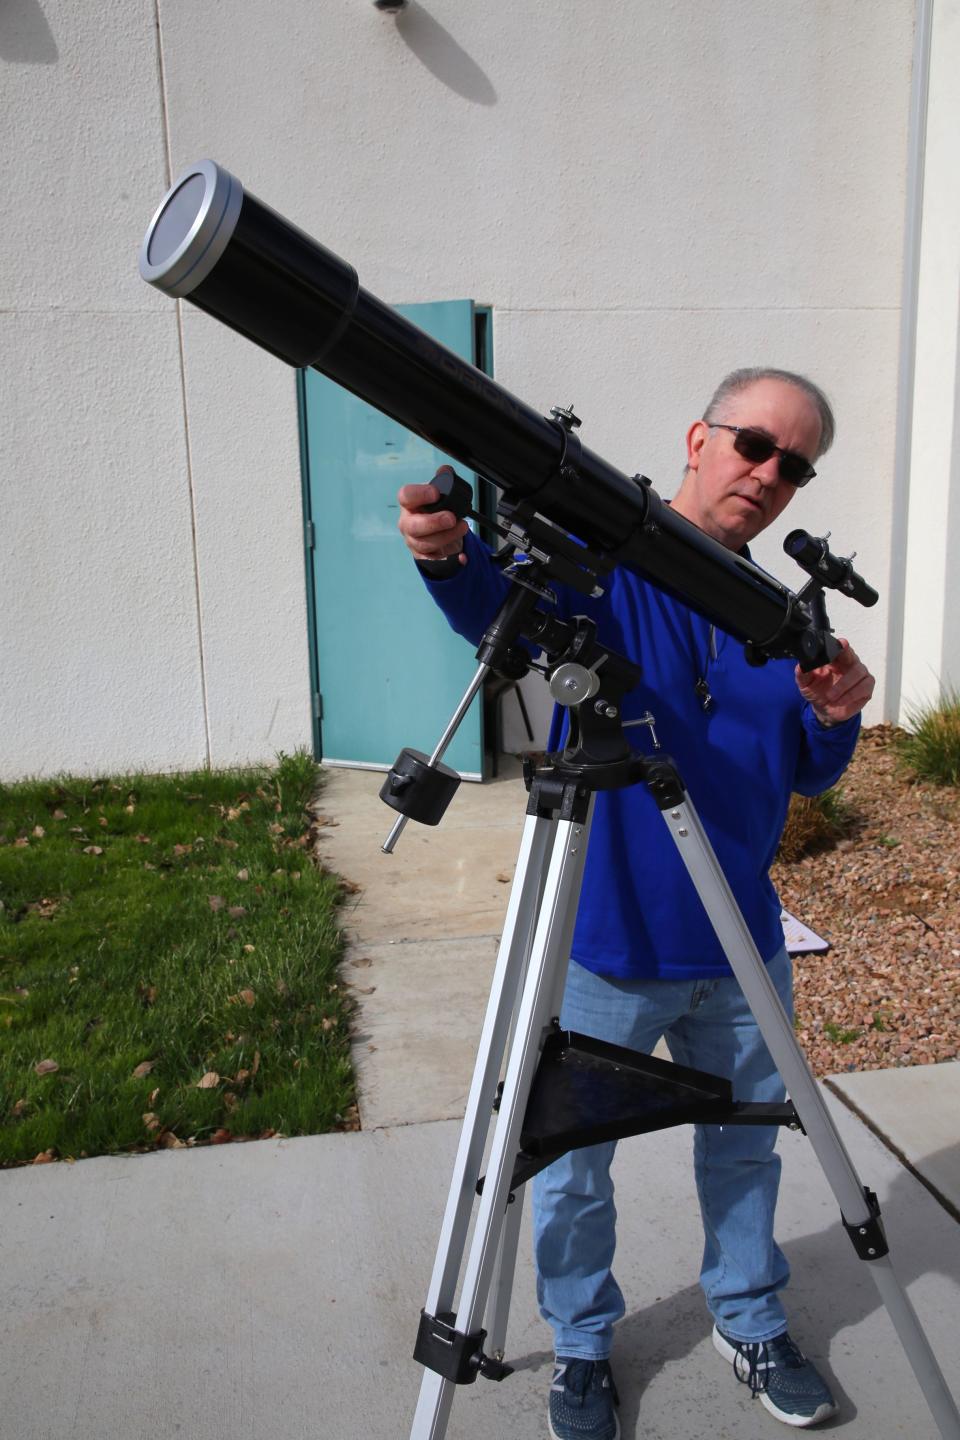 San Juan College Planetarium director David Mayeux will lead a solar eclipse watching event at 11 a.m. Monday, April 8 outside the Planetarium on the college campus, 4601 College Blvd. in Farmington.